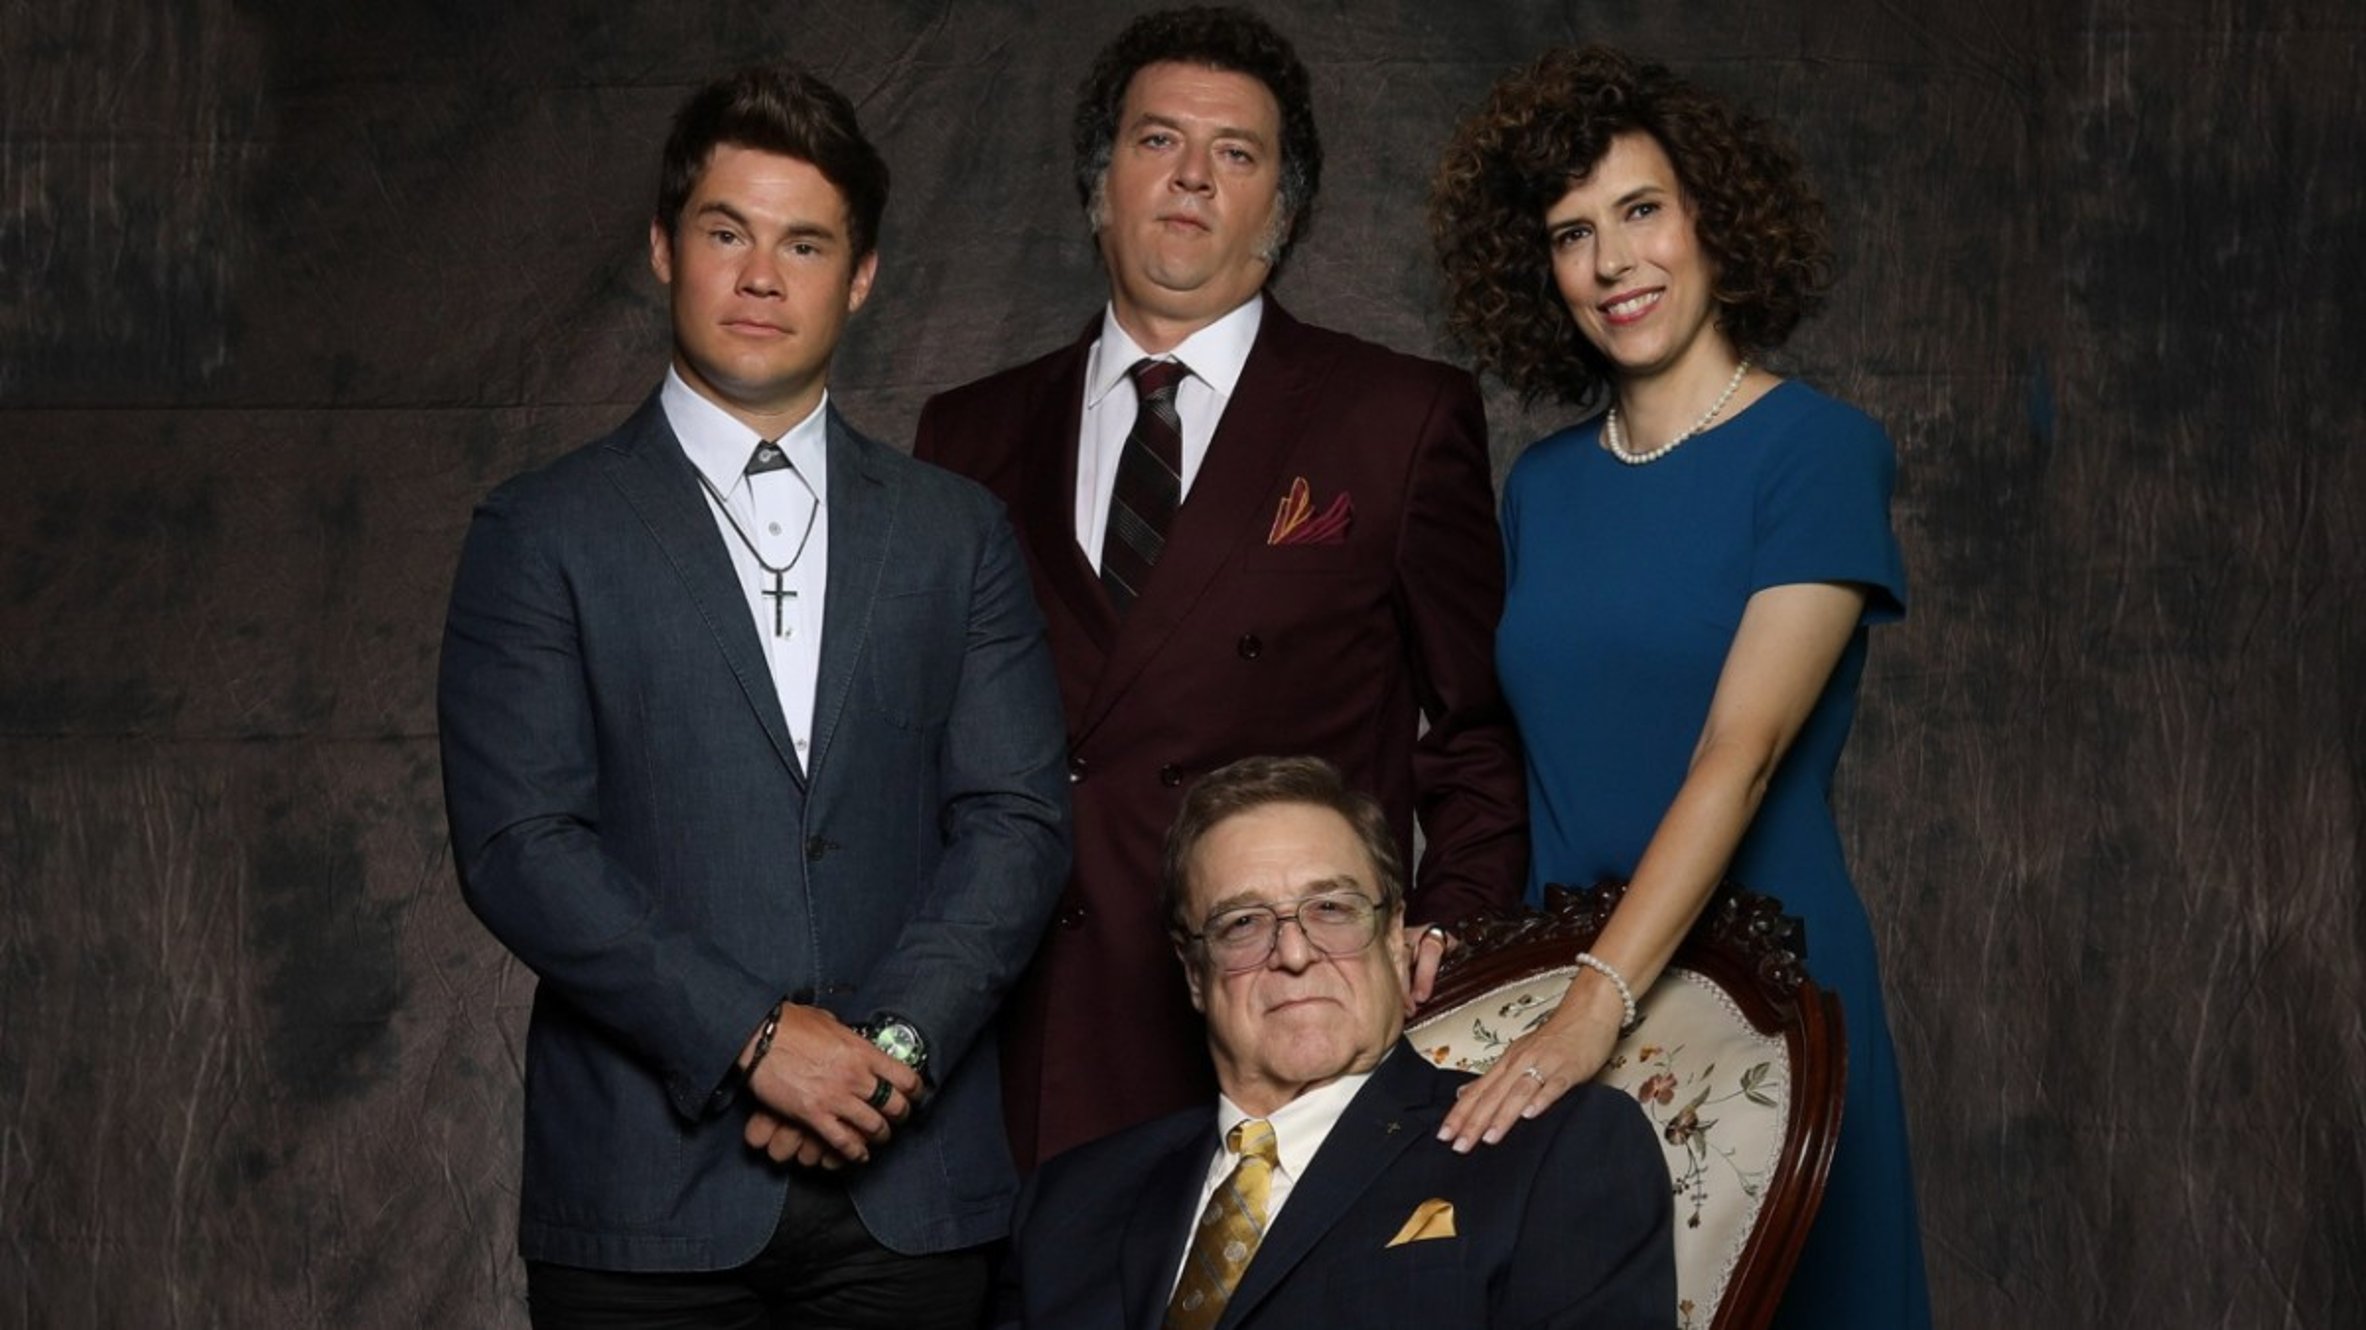 HBO's The Righteous Gemstones Casting!